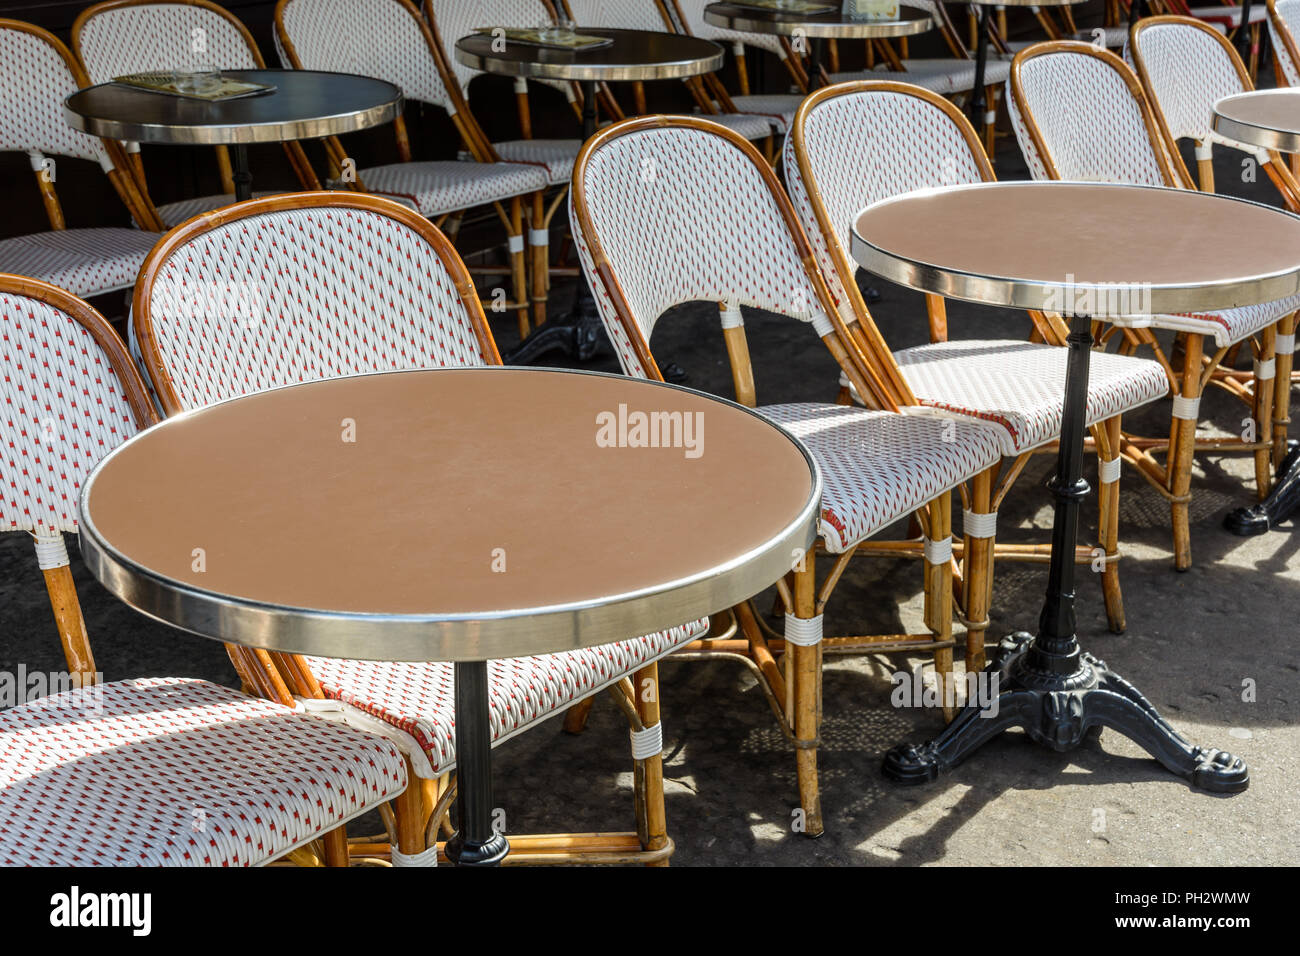 A typical terrace outside of a parisian brasserie set up with rattan chairs and small round tables with a cast iron leg. Stock Photo